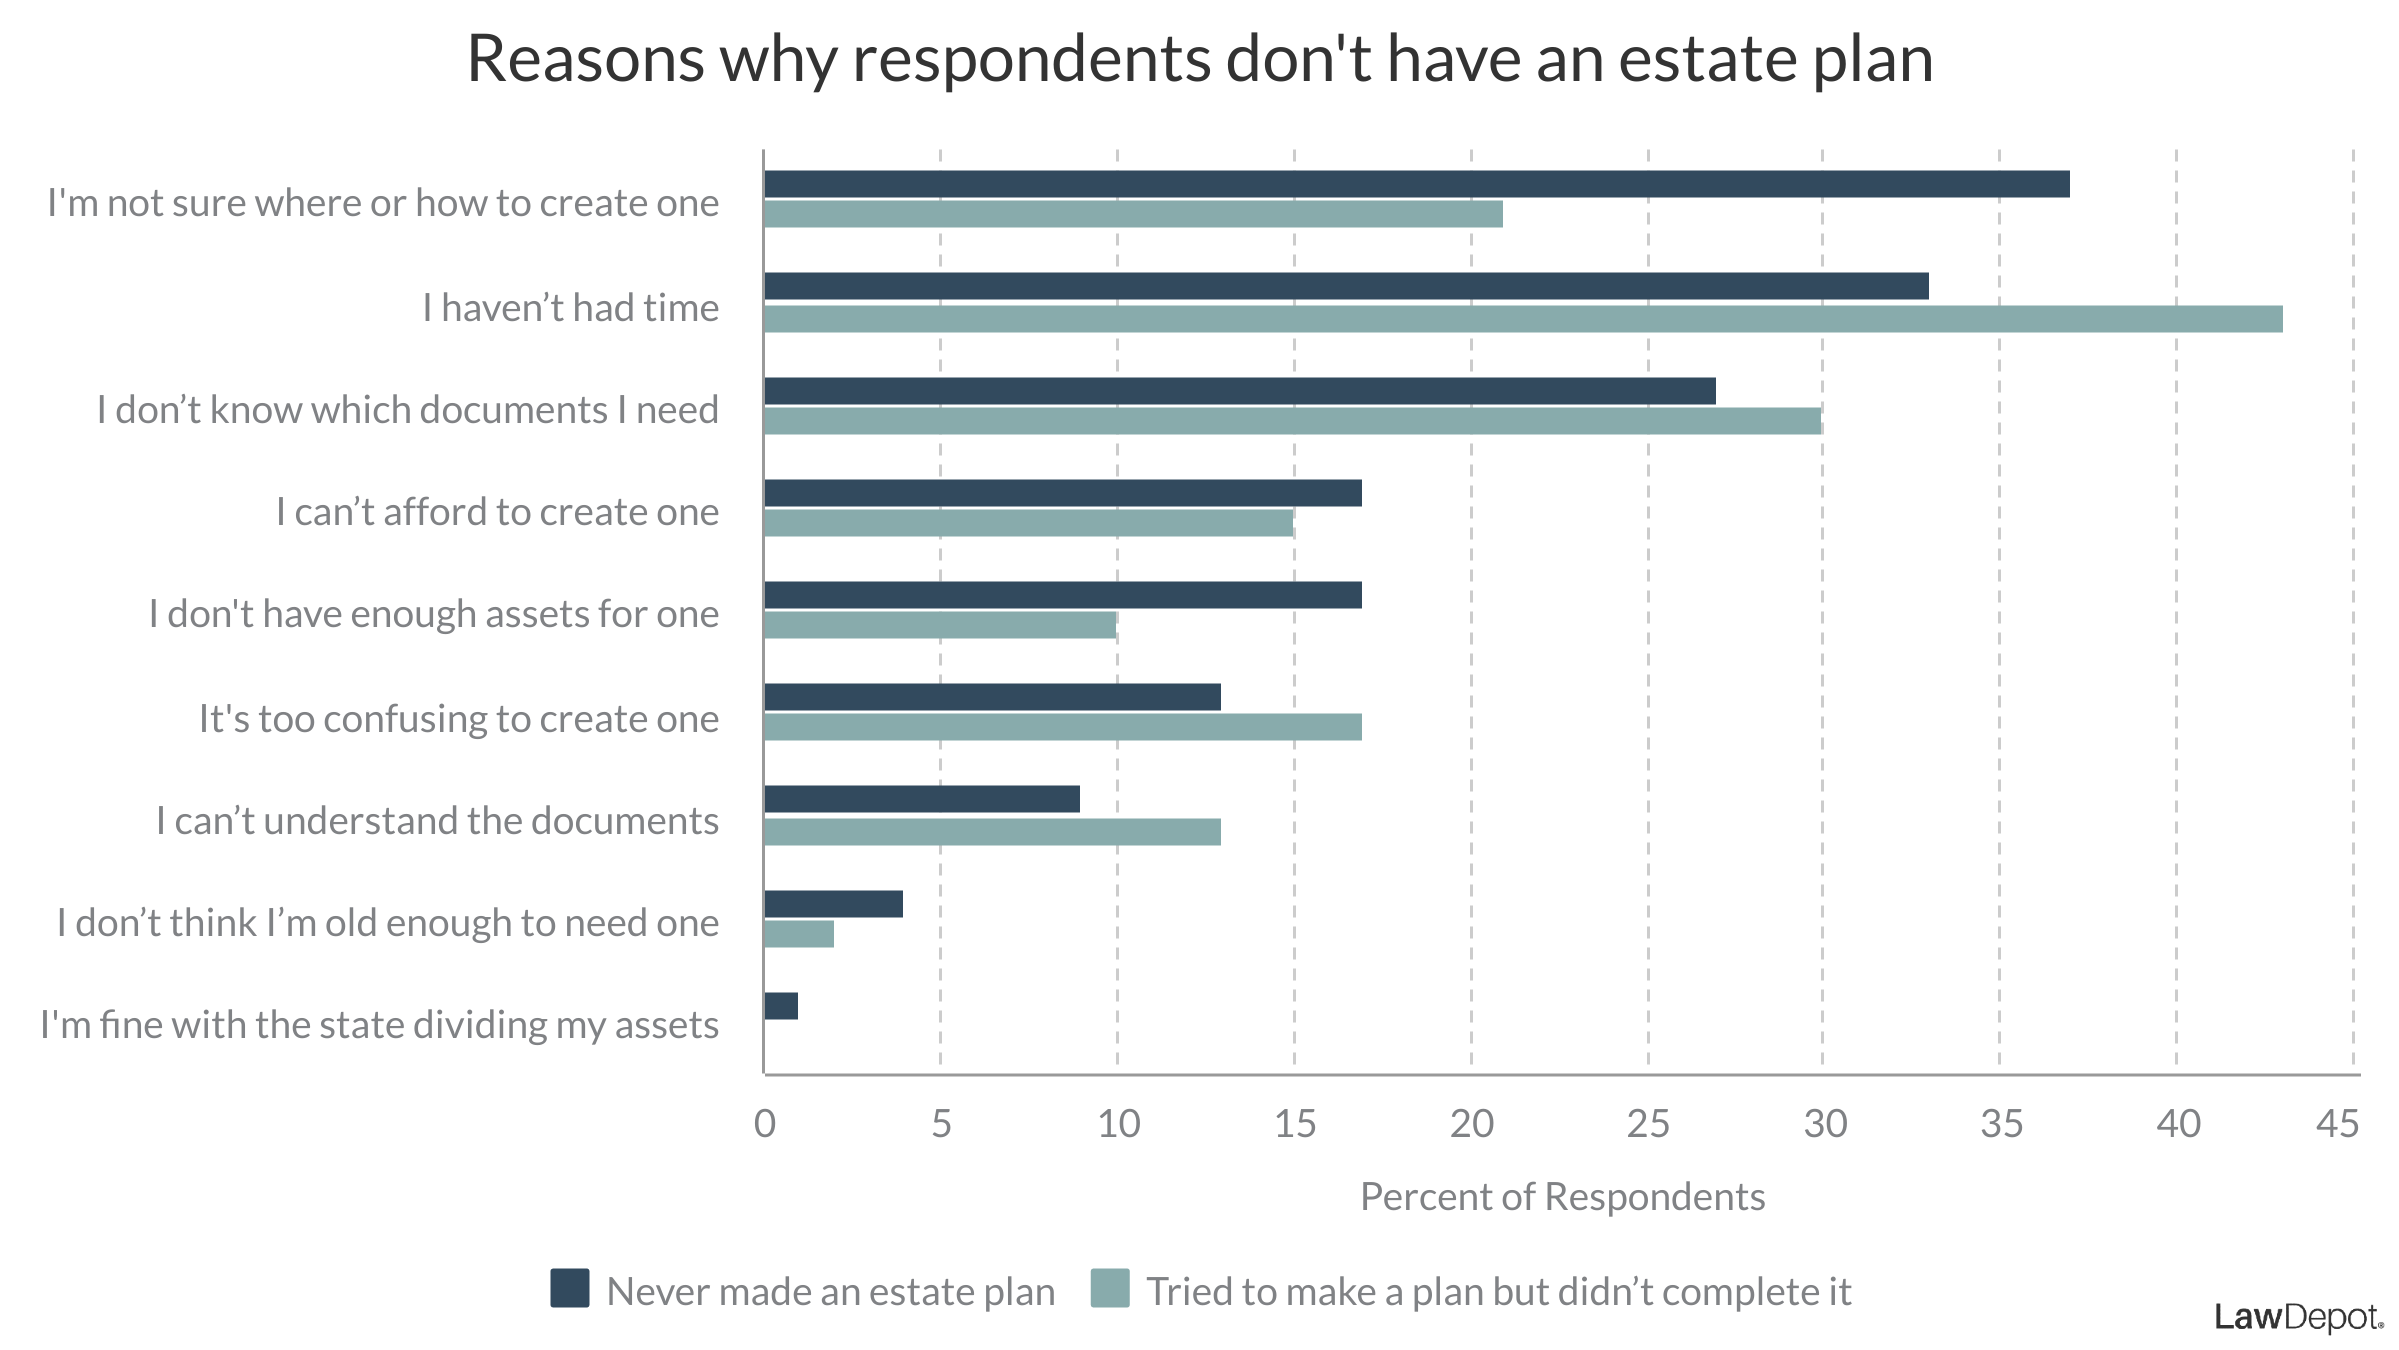 Bar graph showing that the main reasons respondents do not have an estate plan is that they are not sure where or how to create one, they have not had the time and they are not sure which documents they need. 